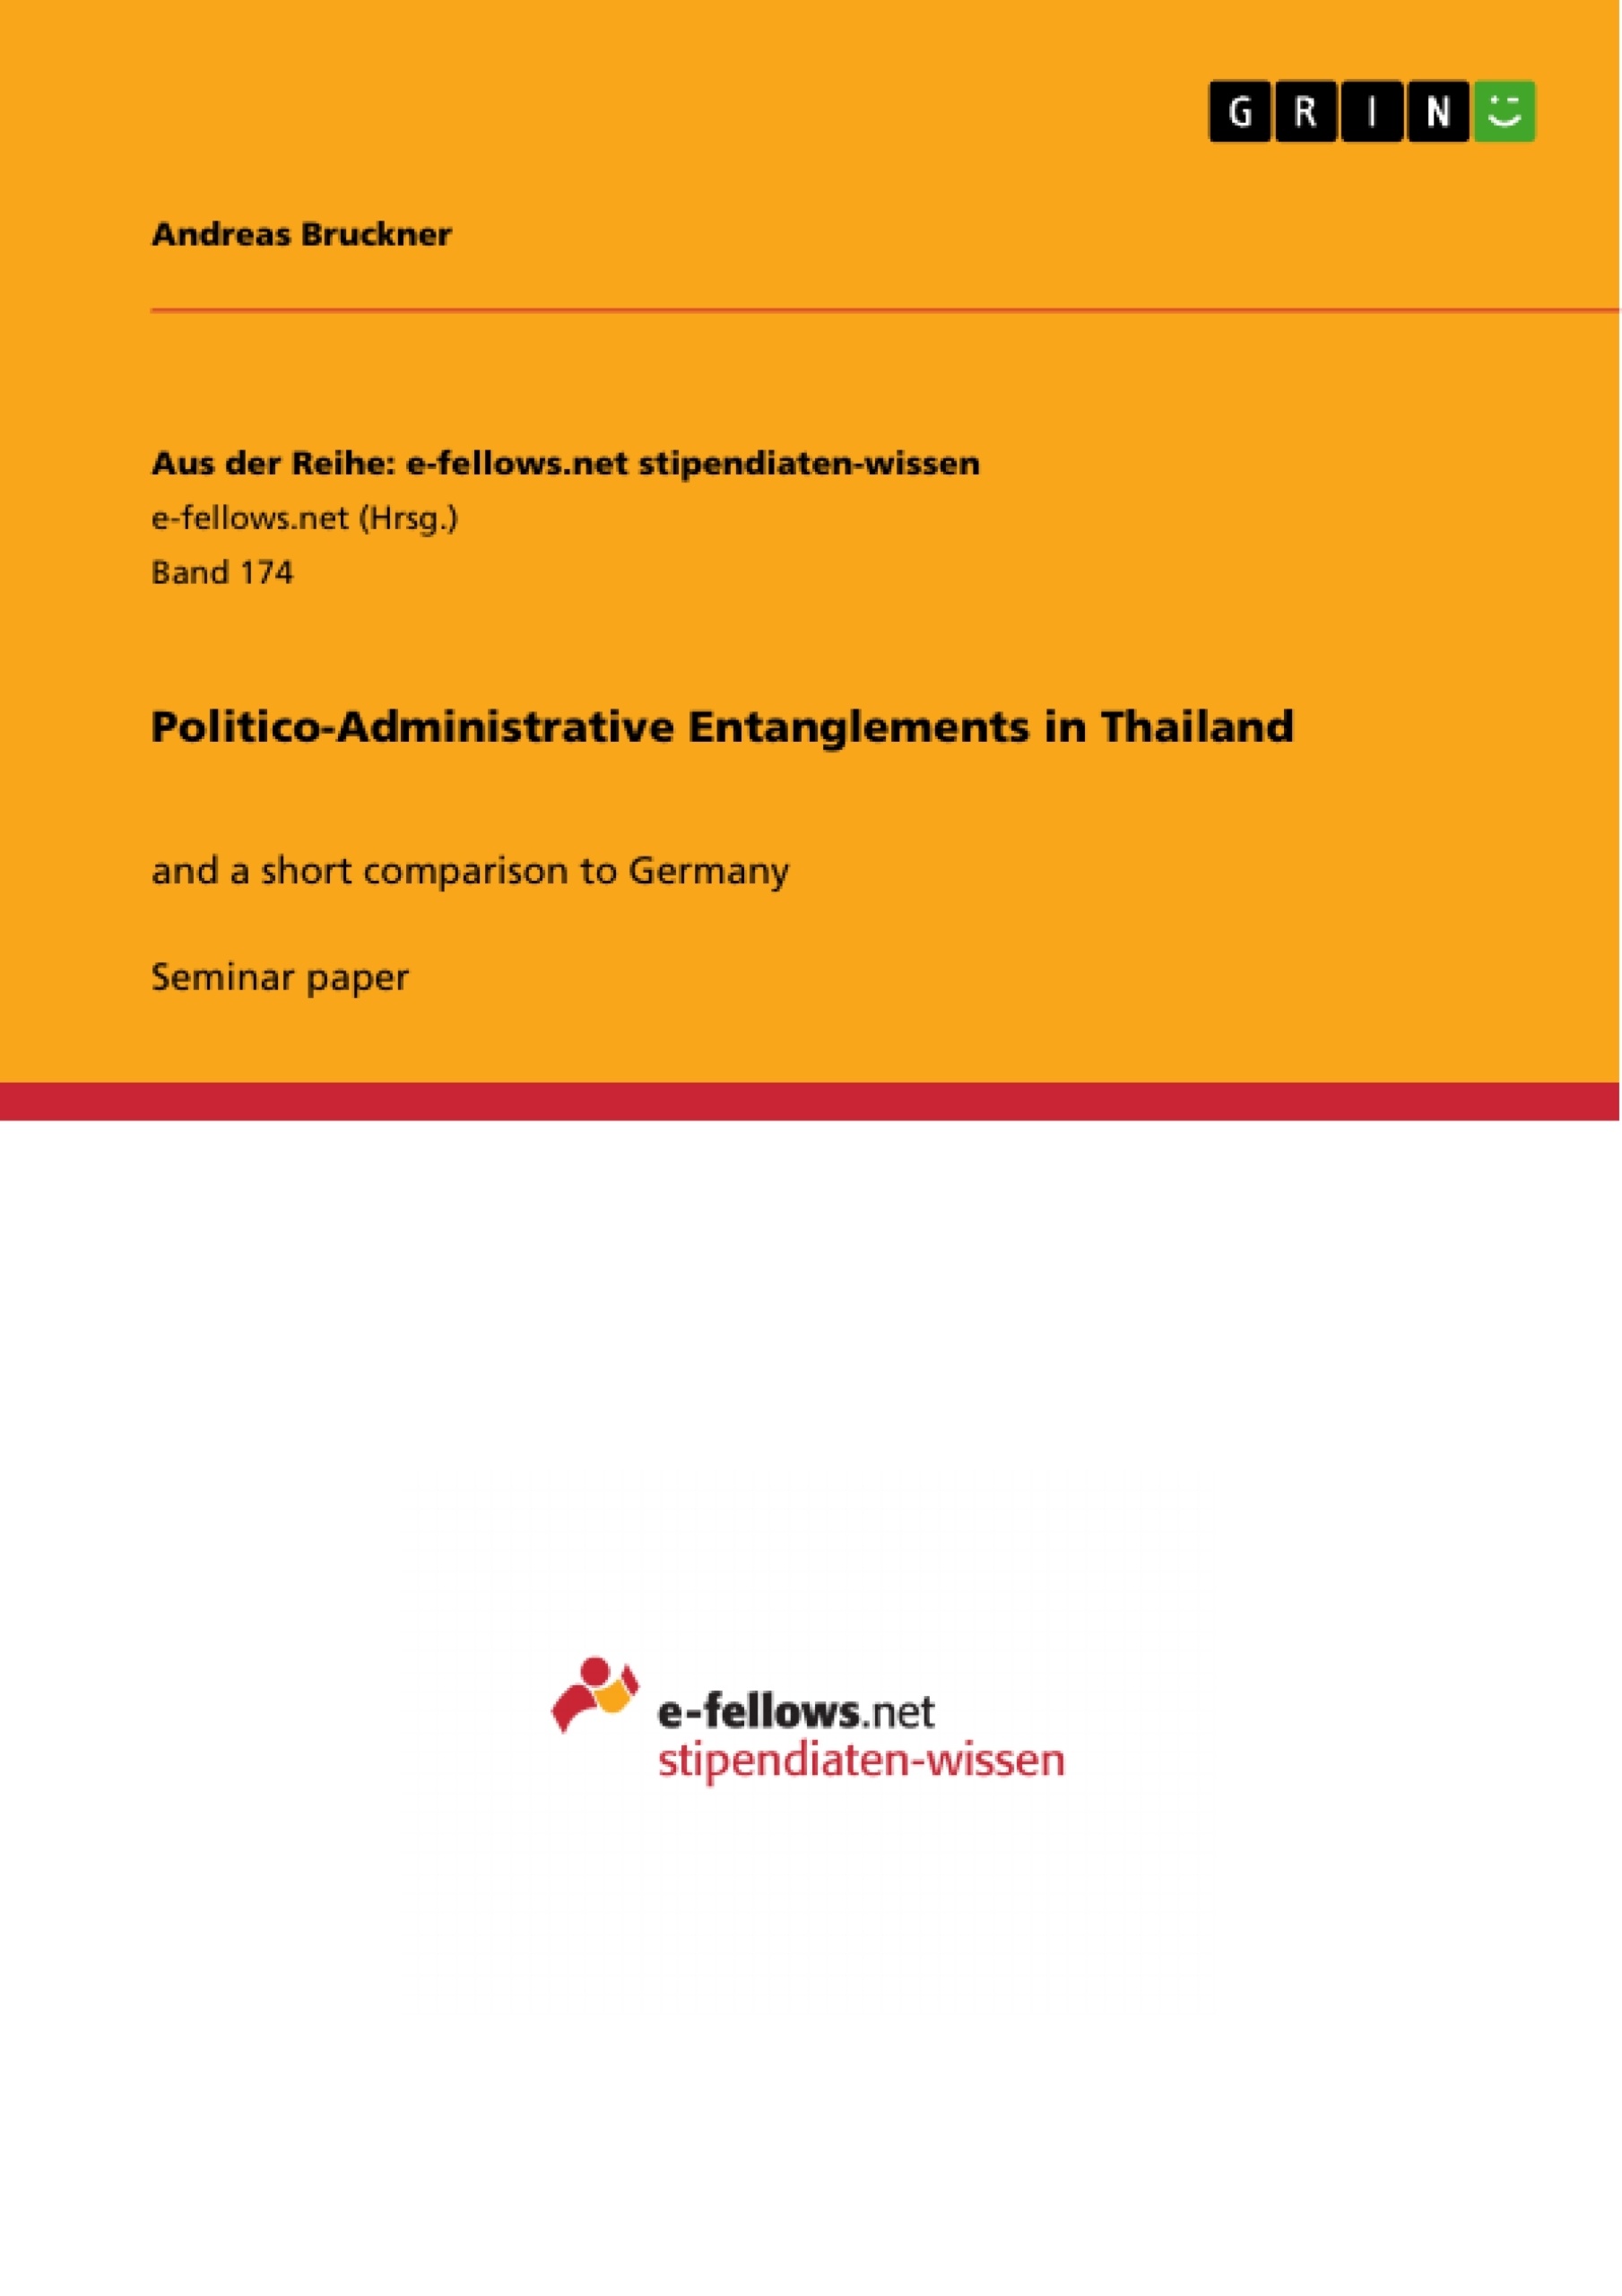 Title: Politico-Administrative Entanglements in Thailand